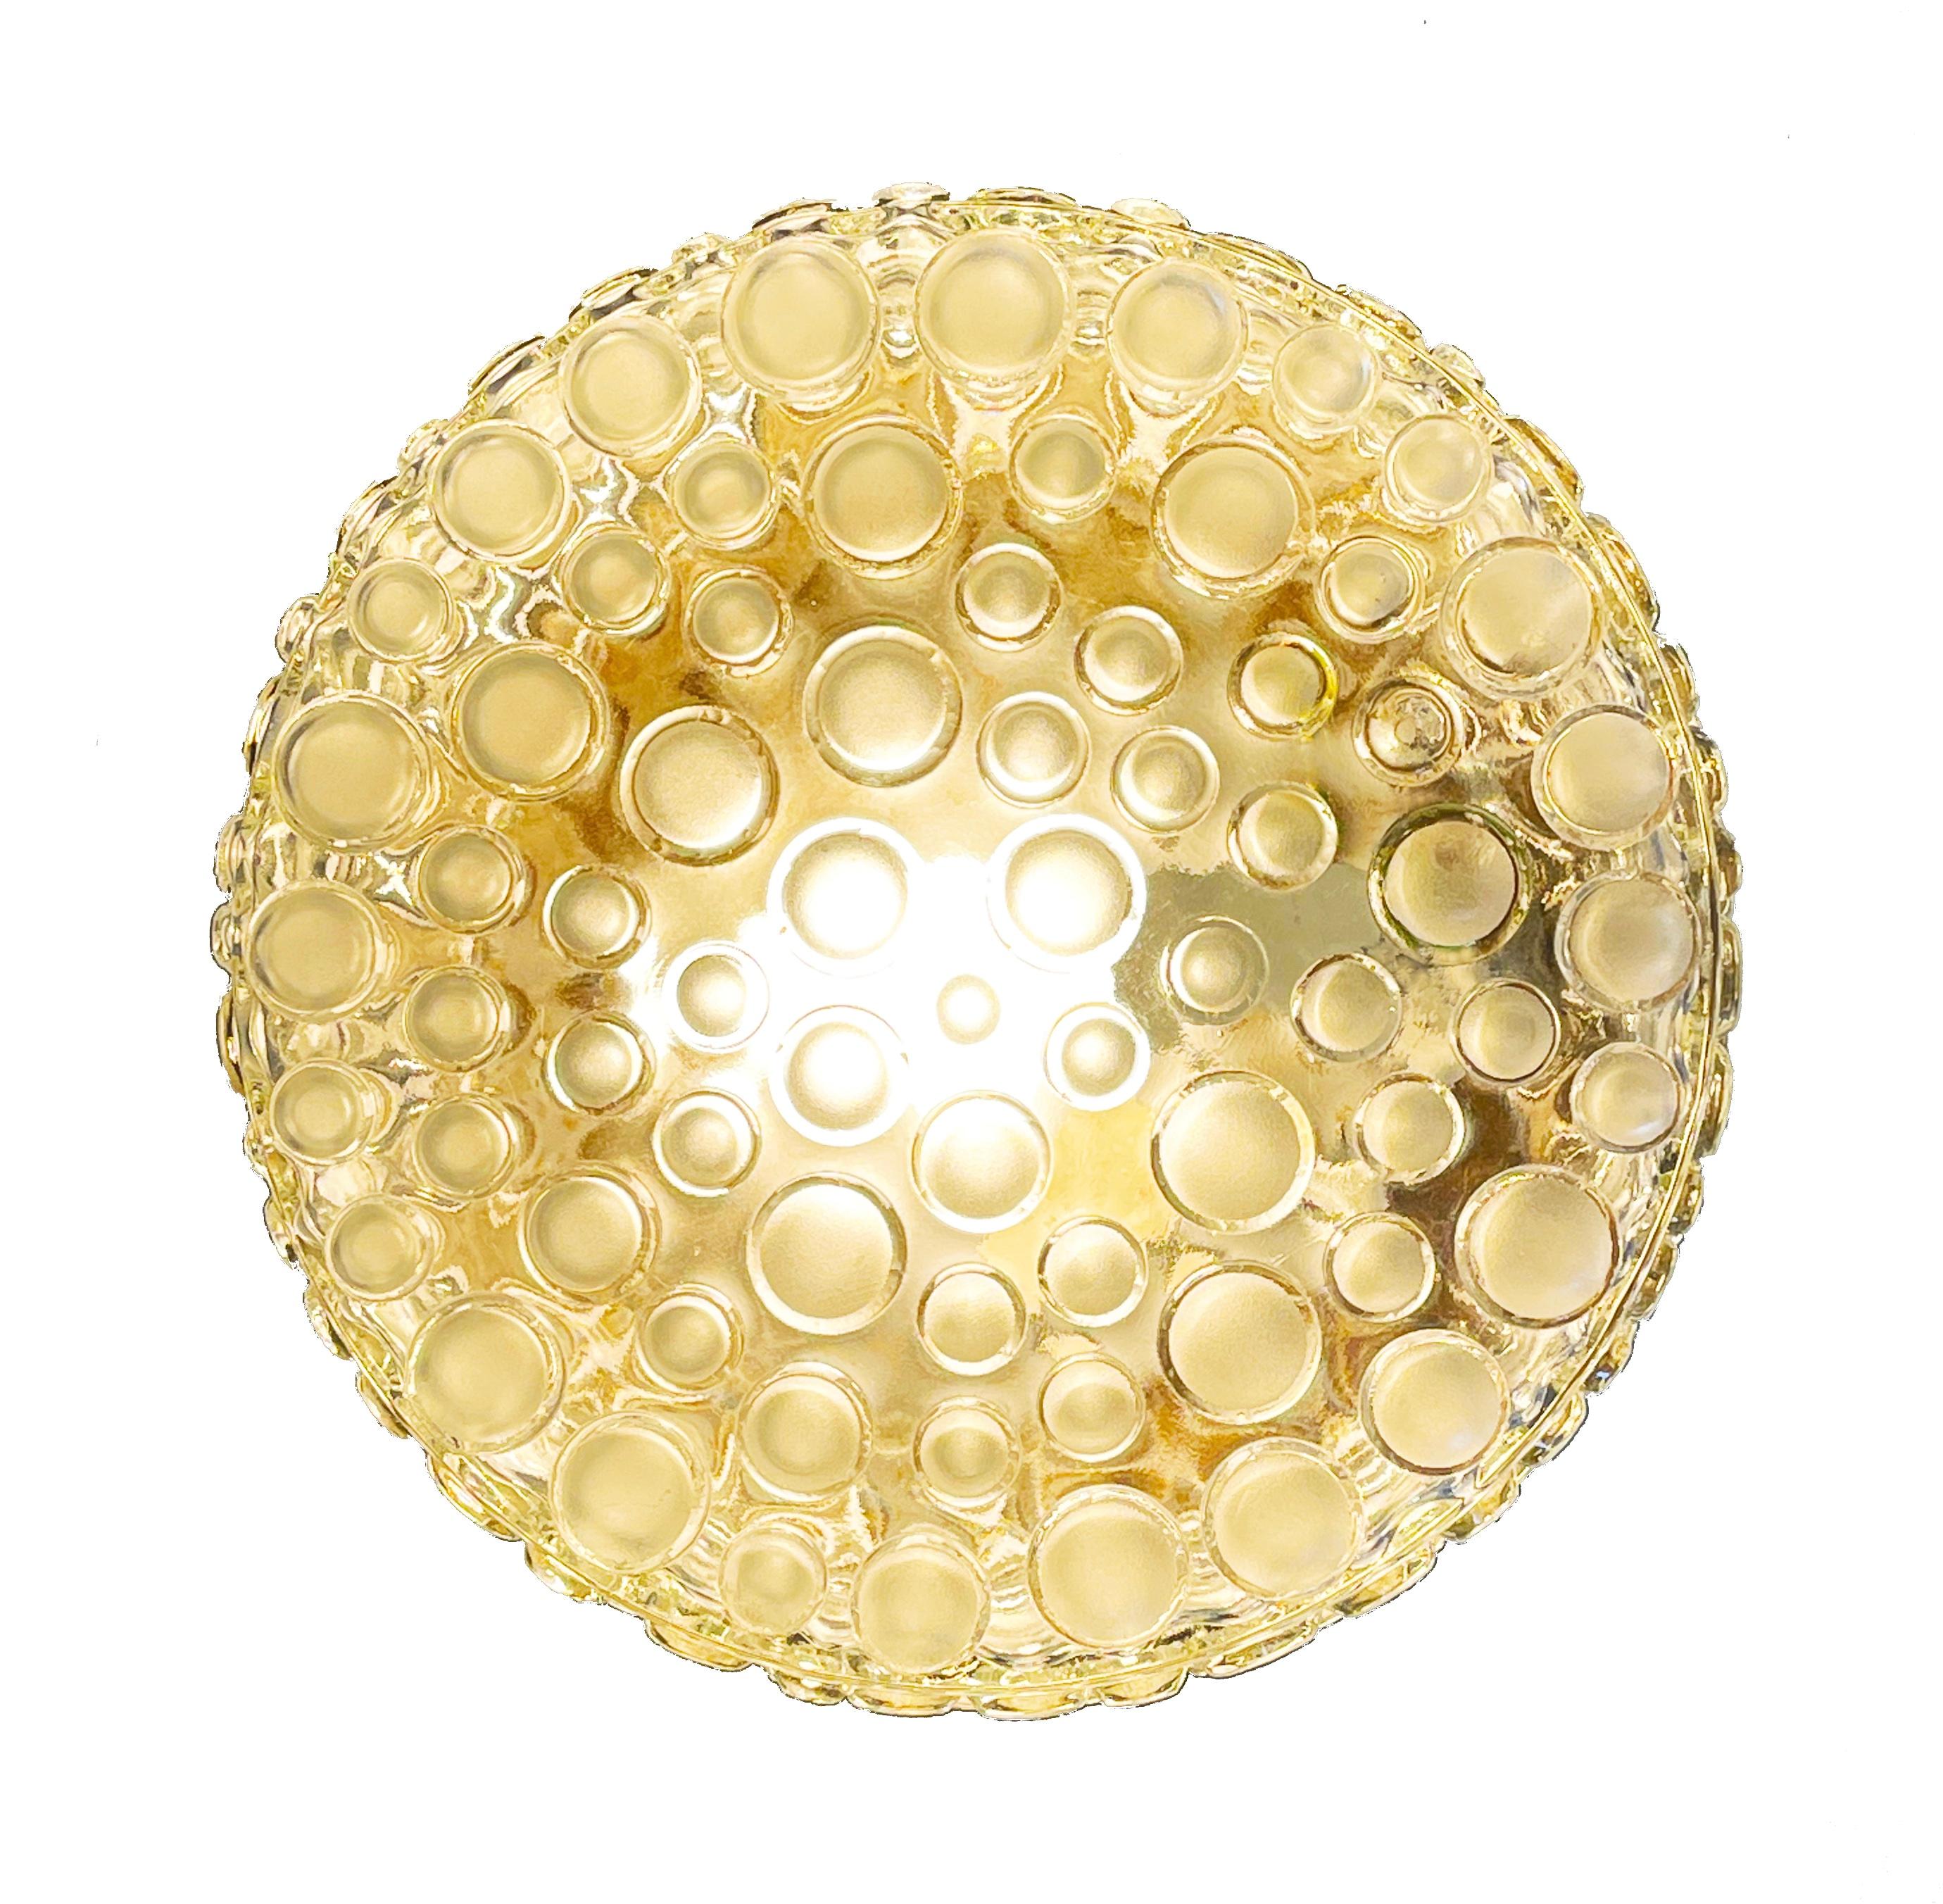 Magnificent, flush base ceiling or wall lamp by ''Hustadt Leuchten'', one of Germans famous mid century manufacturer of high-end design lighting.
Comes in a round shape with frosted bubbles.
Beautiful warm light.

Can be wall or ceiling mounted.
The